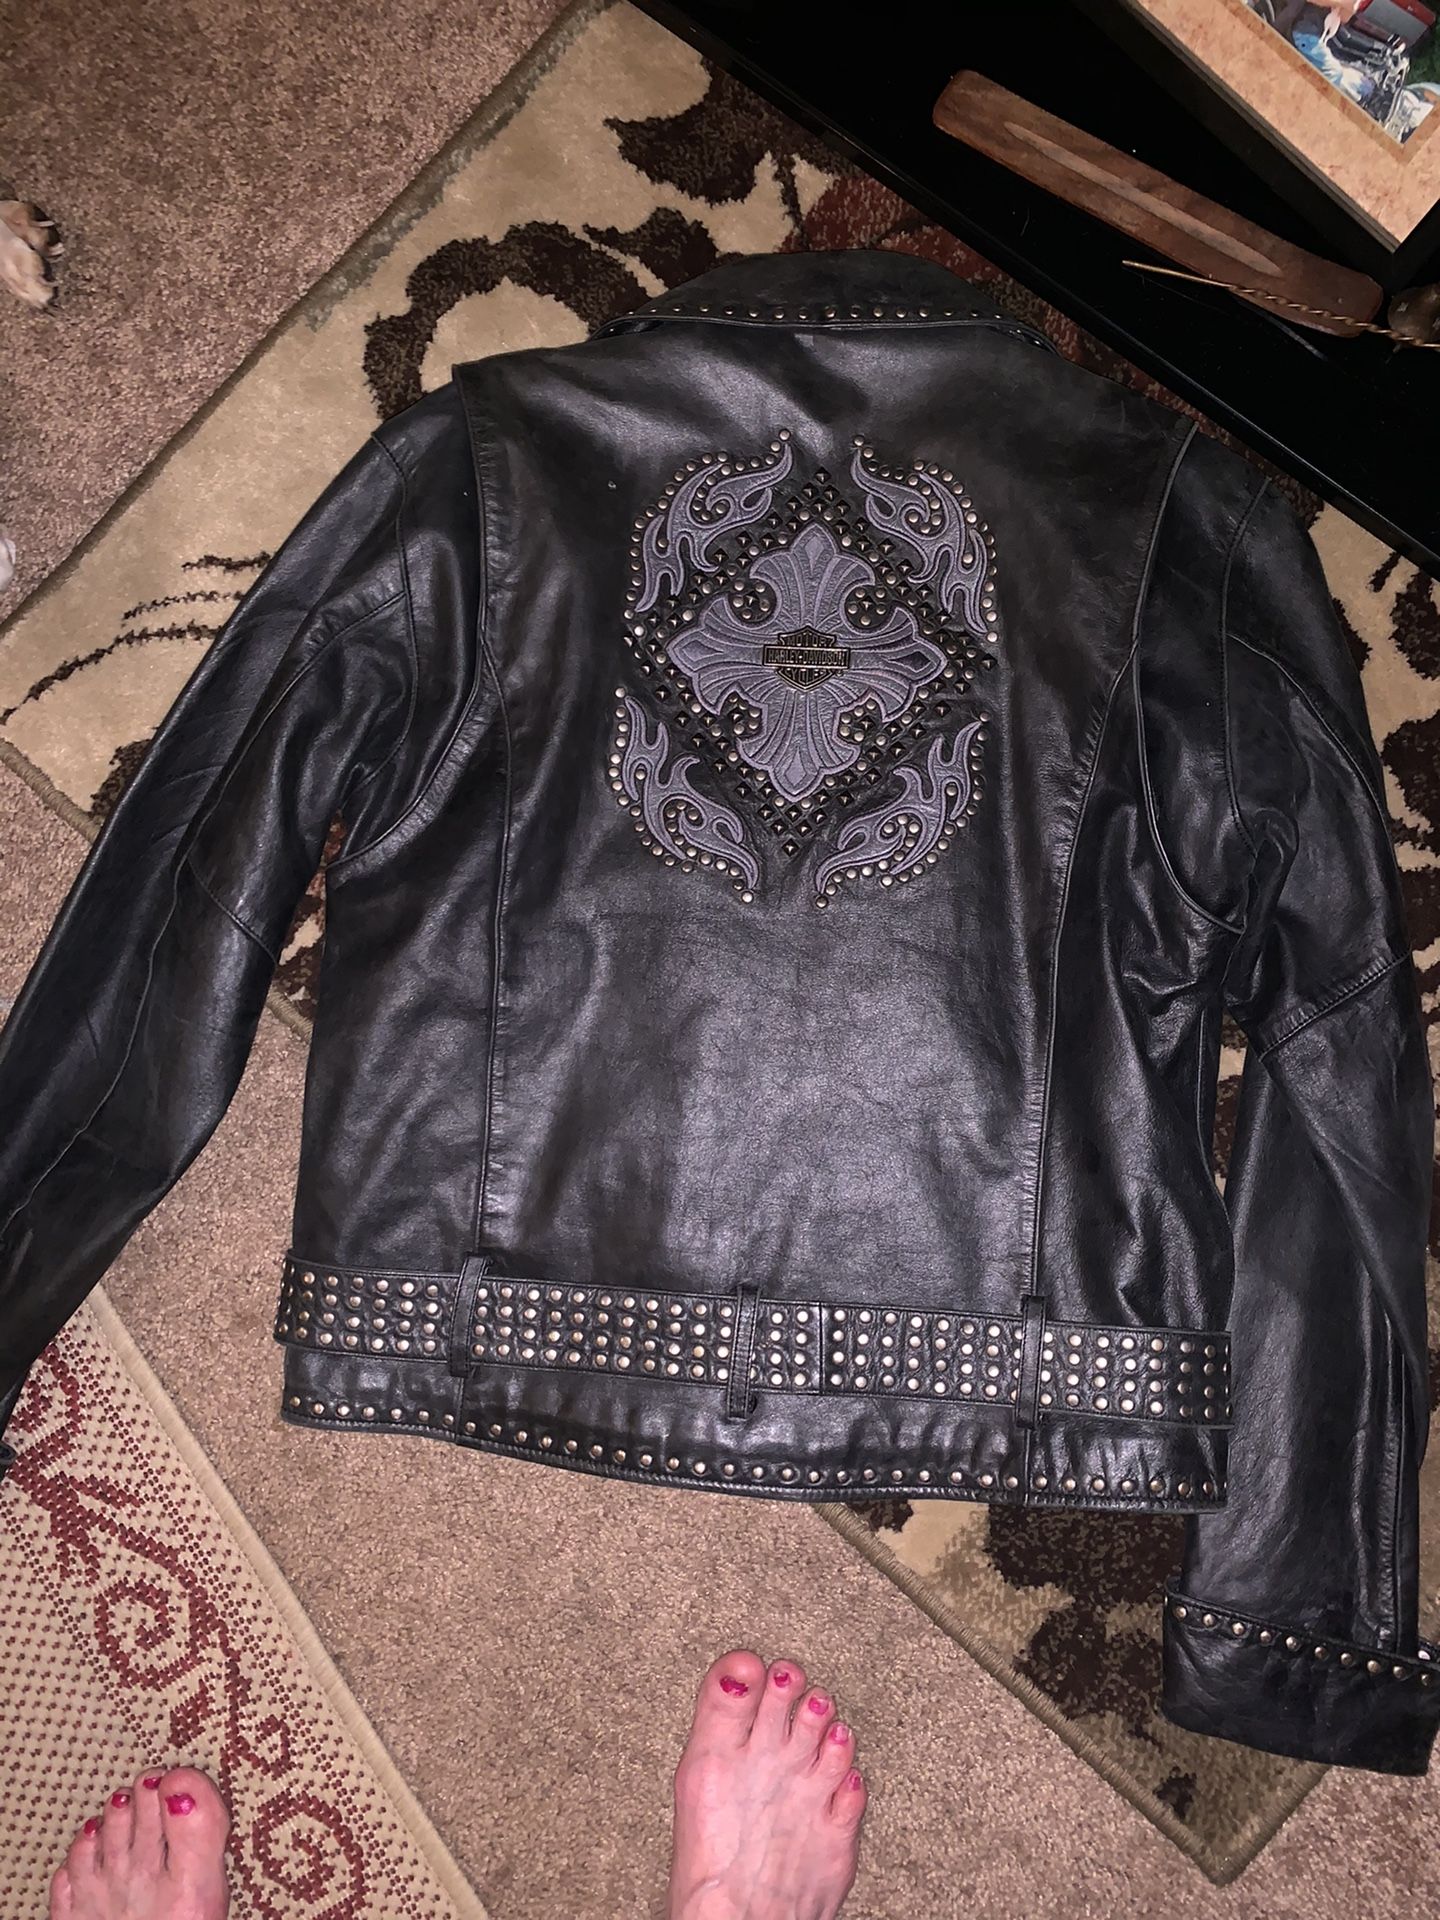 And official Harley Davidson jacket I wore a woman size medium